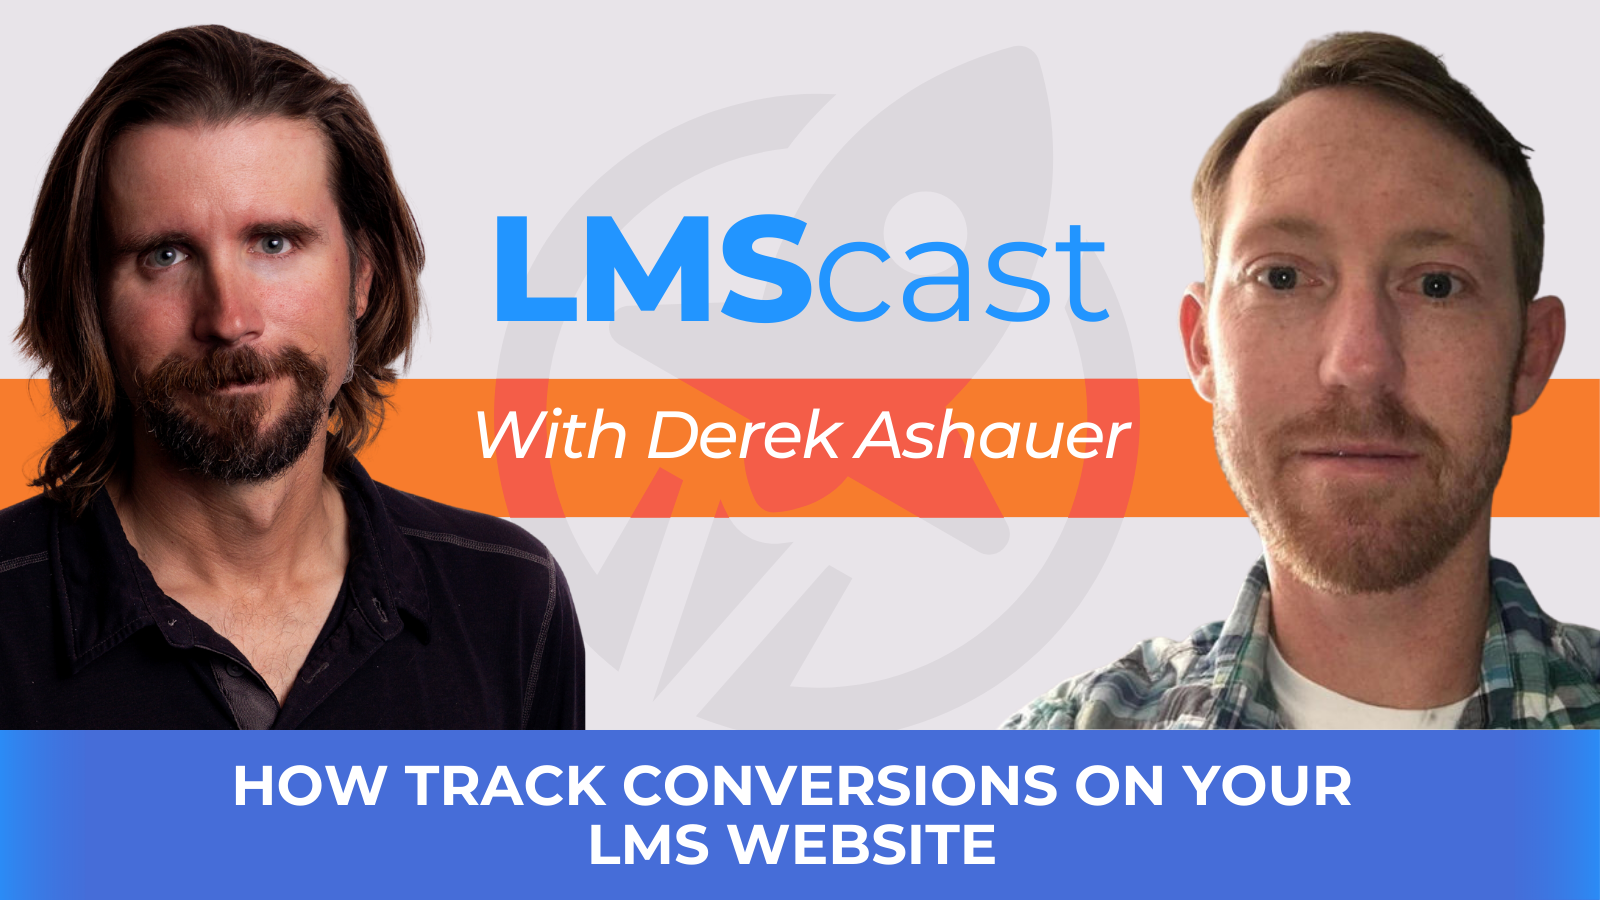 How Track Conversions on Your LMS Website with Derek Ashauer [Video]